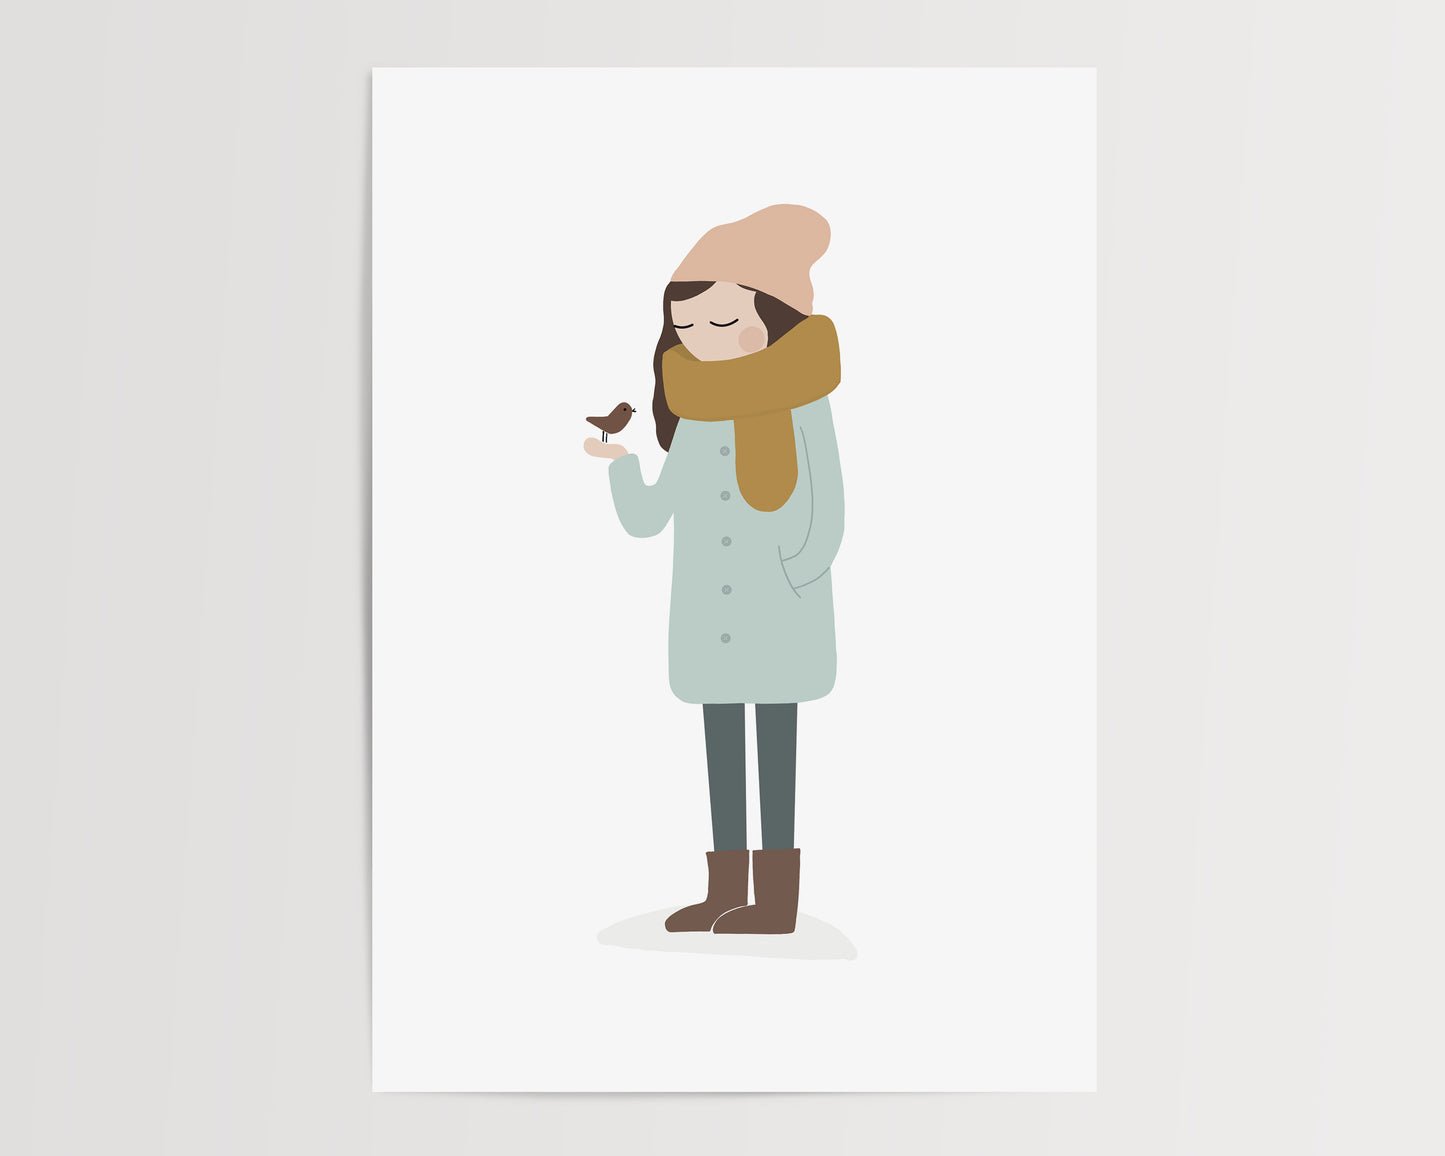 A girl wintery dressed while holding a bird illustration by Jollie Bluebear